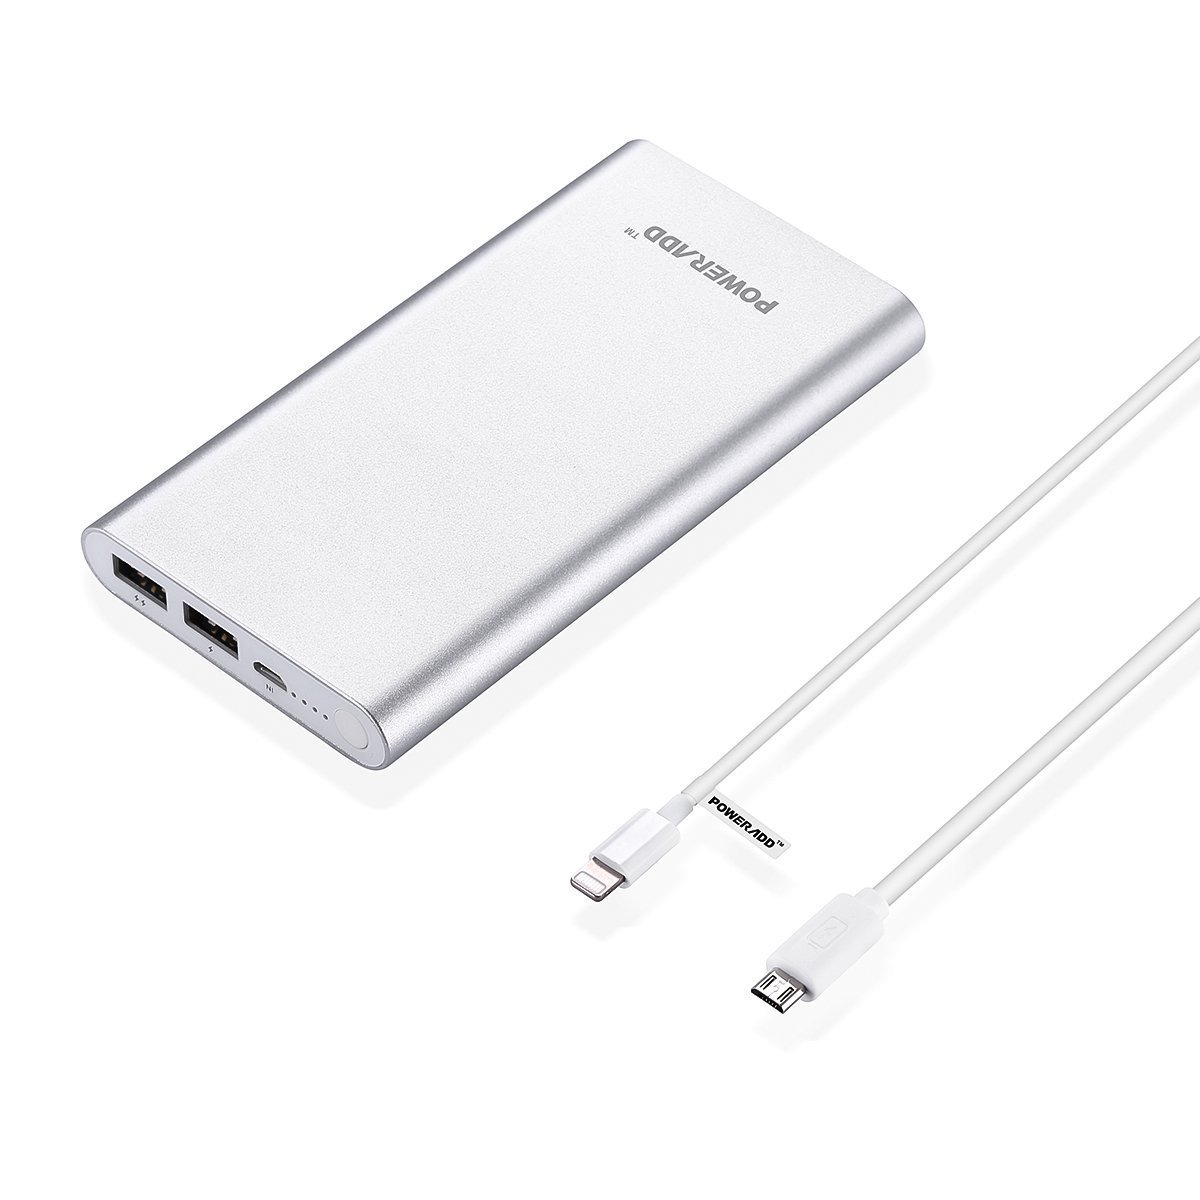 Save over 25% off on Poweradd 10,000mAh External Power Banks!